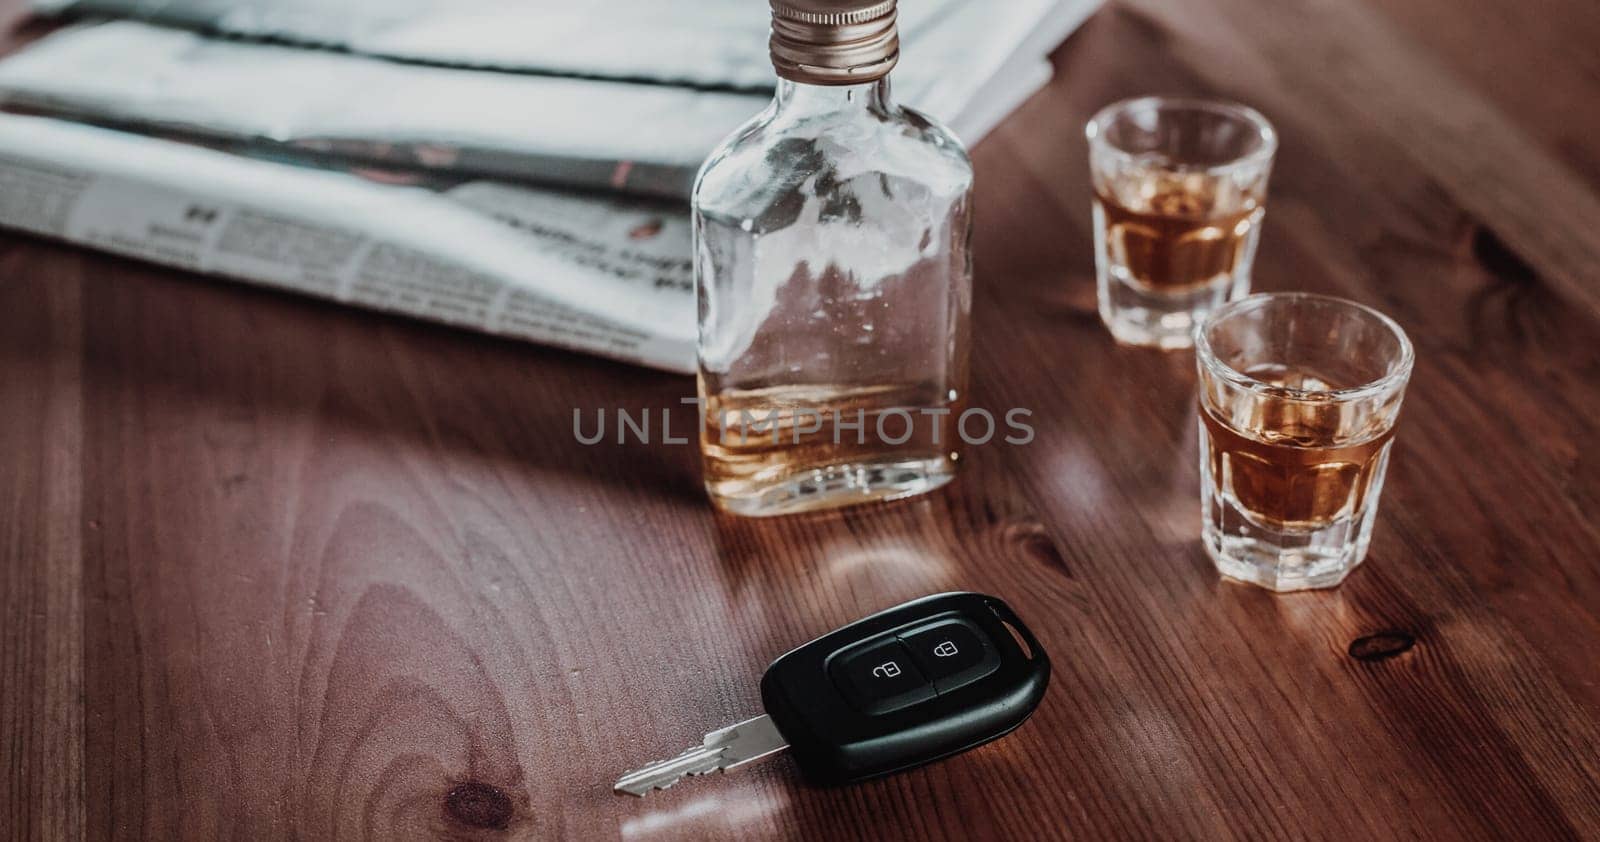 Do not drink and drive concept, Close up of car keys and glass of strong alcohol rum, driving concept, beware of alcohol